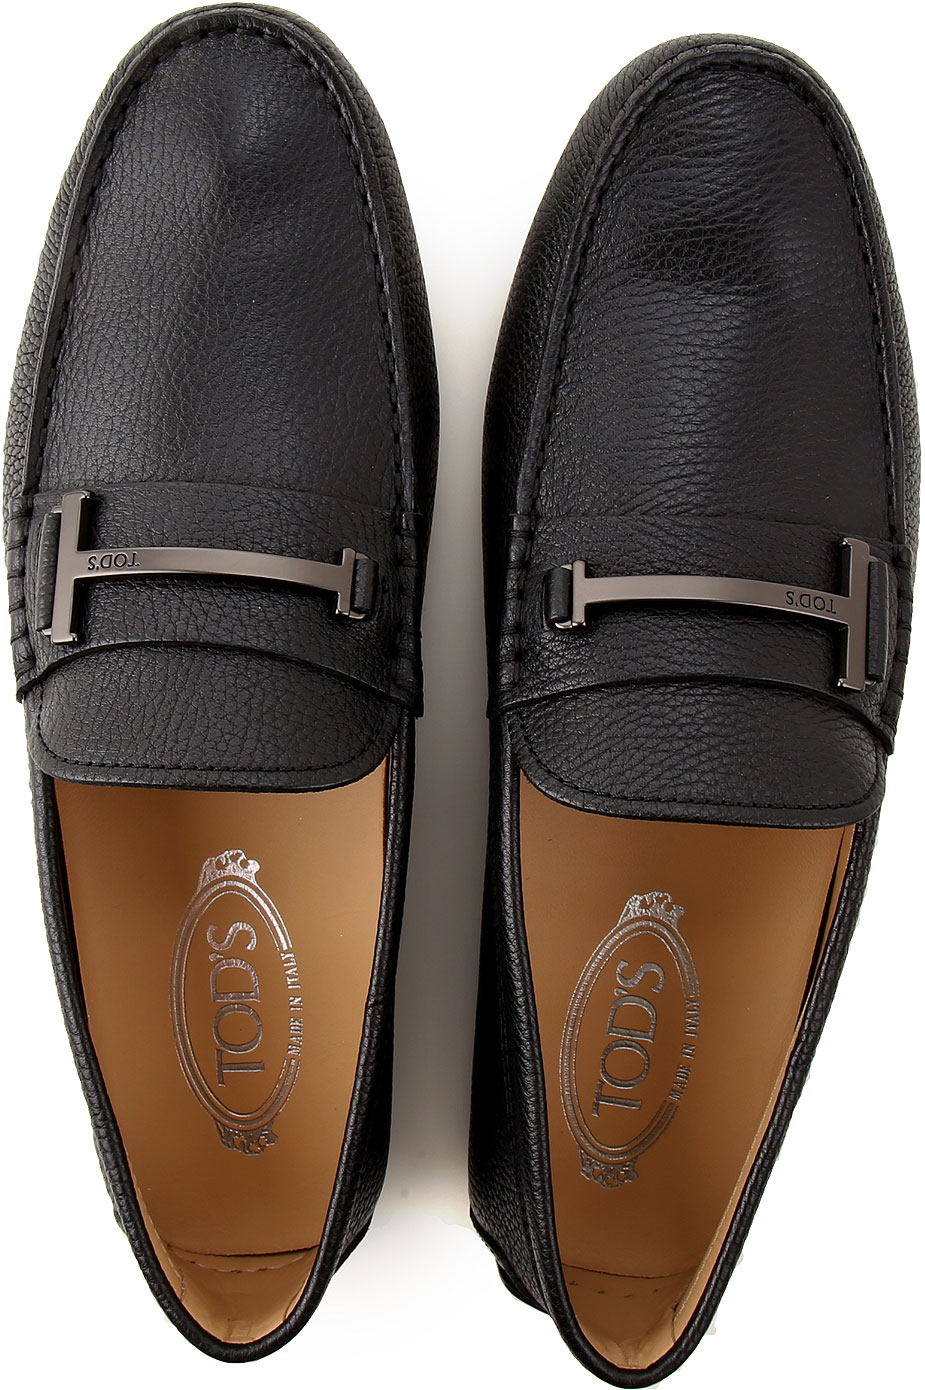 Mens Shoes Tods, Style code: xxm42c0dh50vypb999--